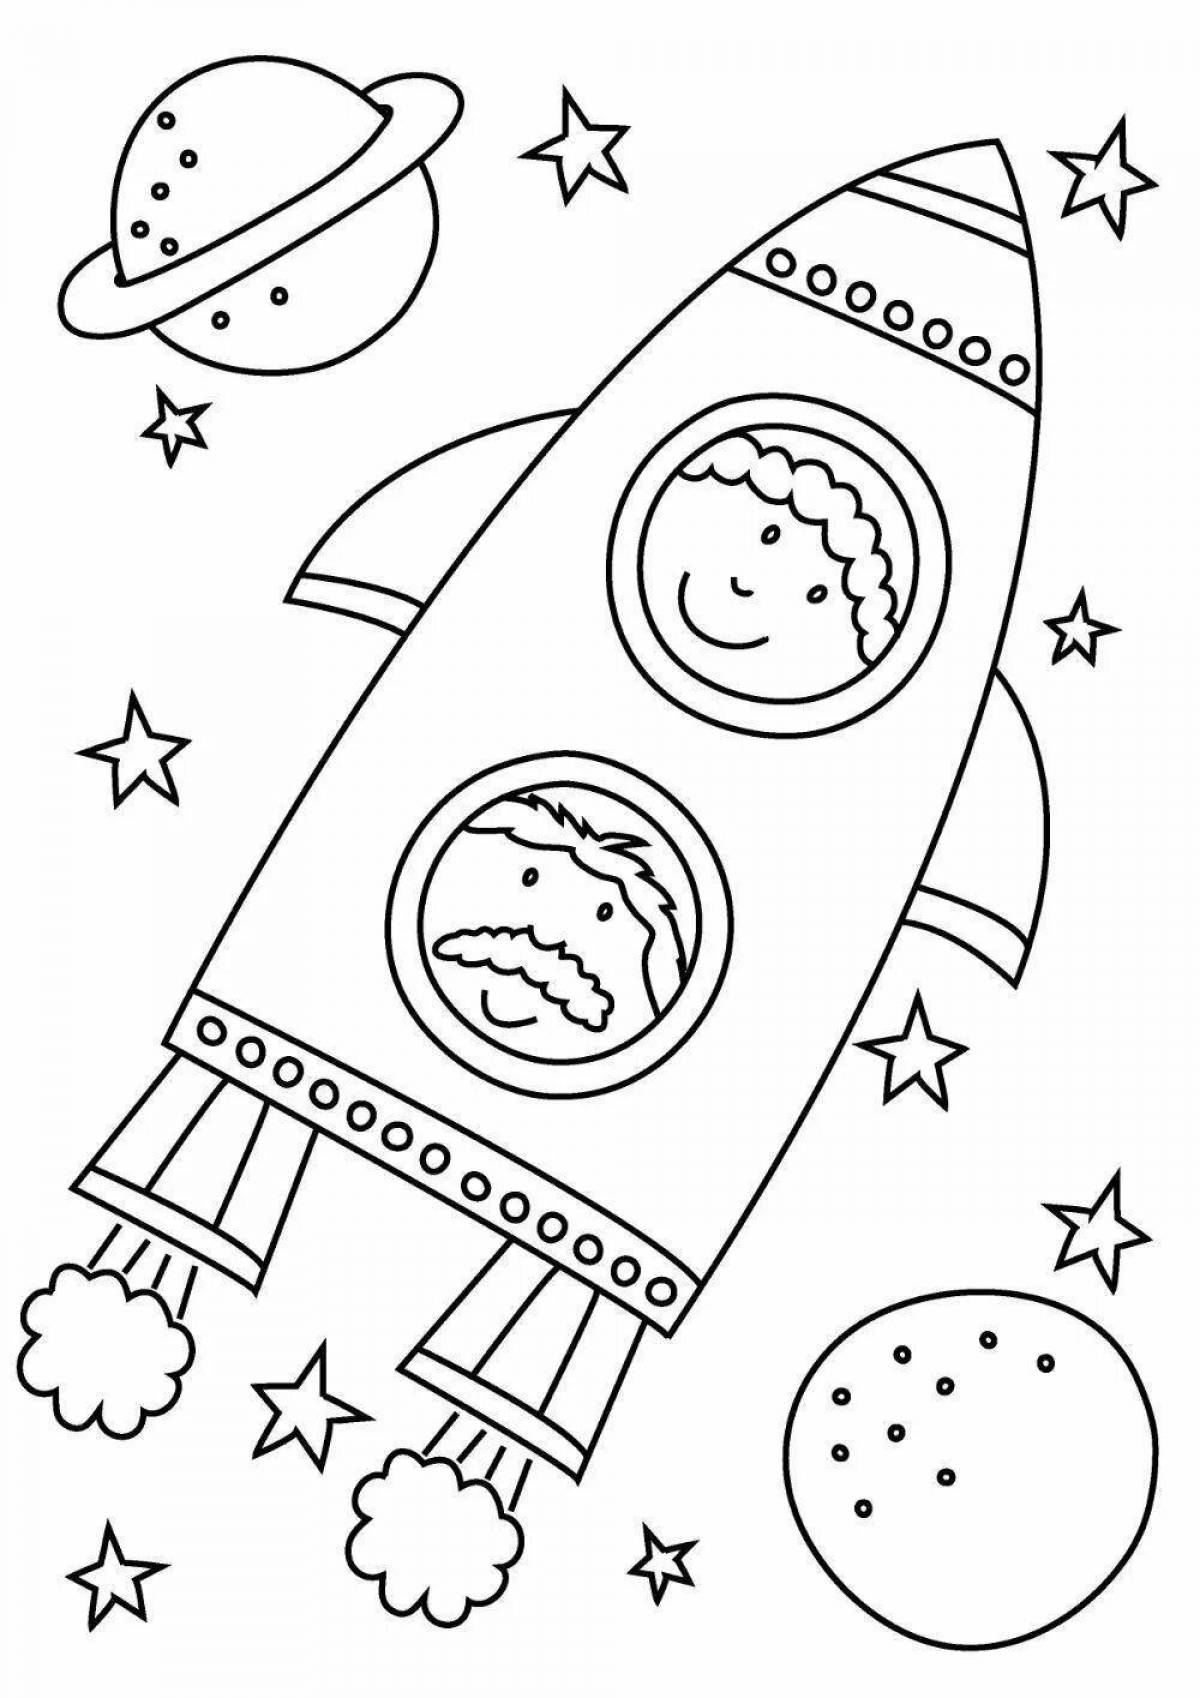 Exciting space coloring book for kids